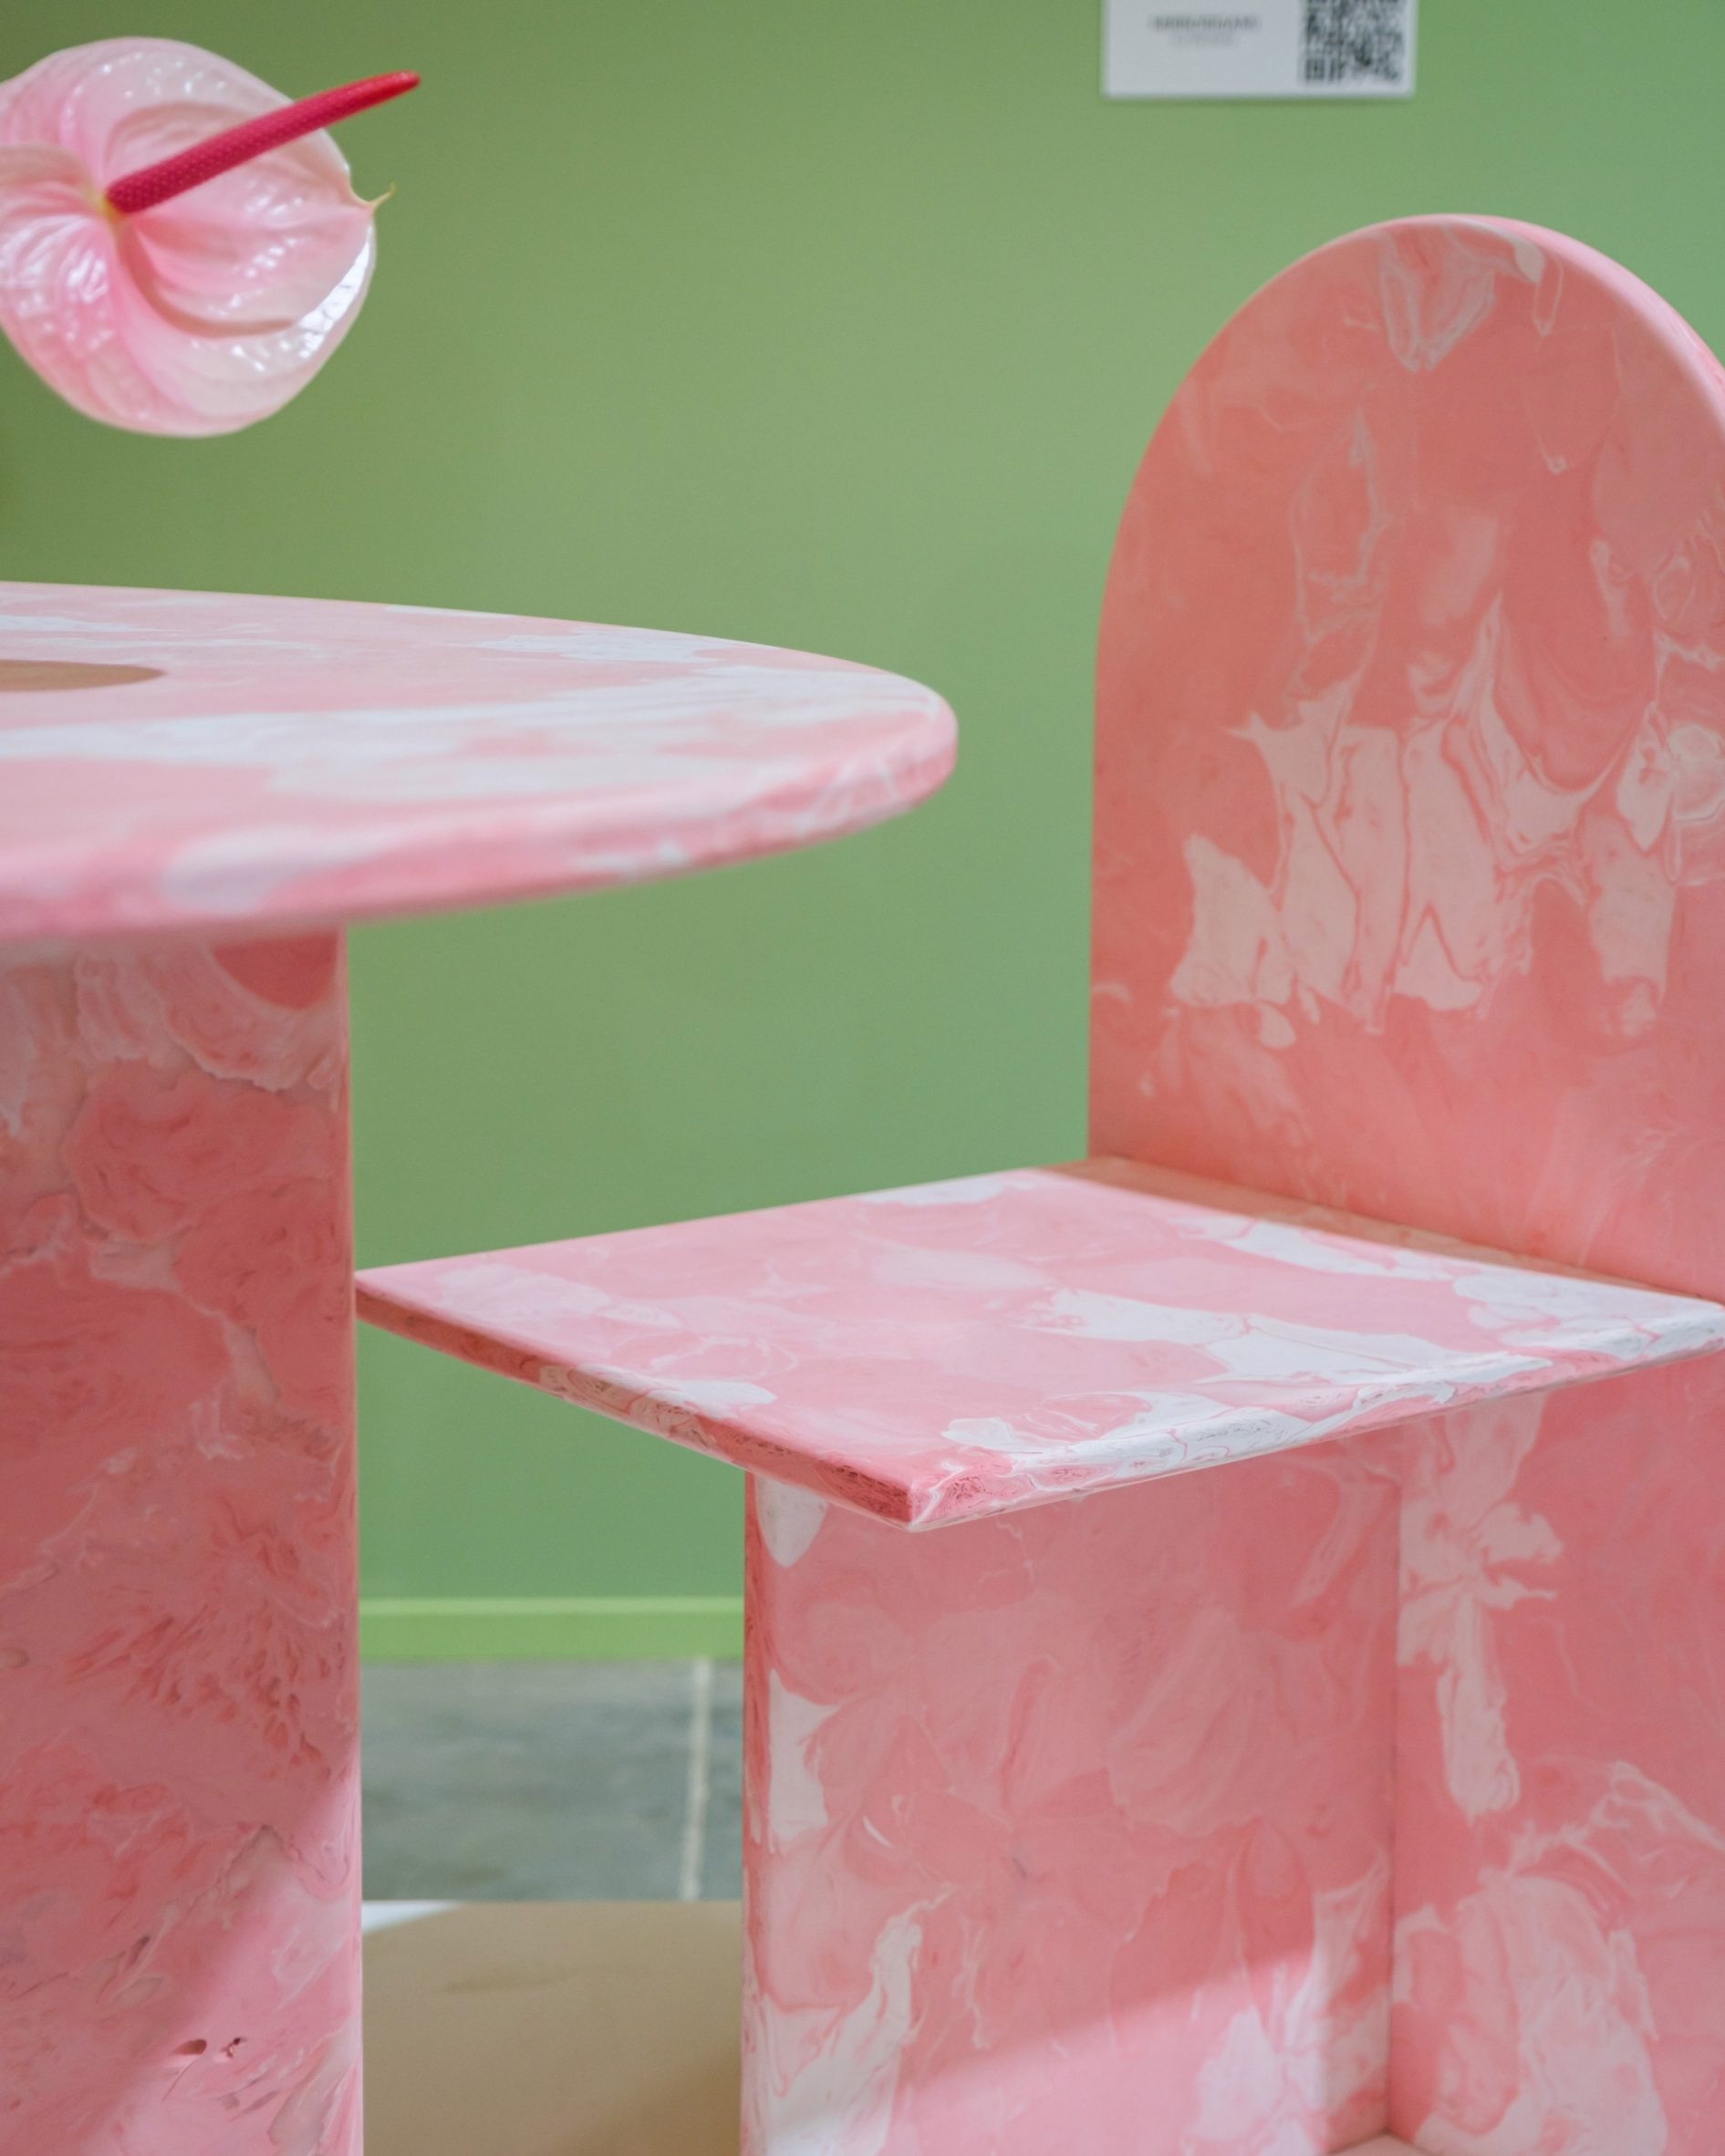 ANQA Studios presents furniture made from recyled plastic